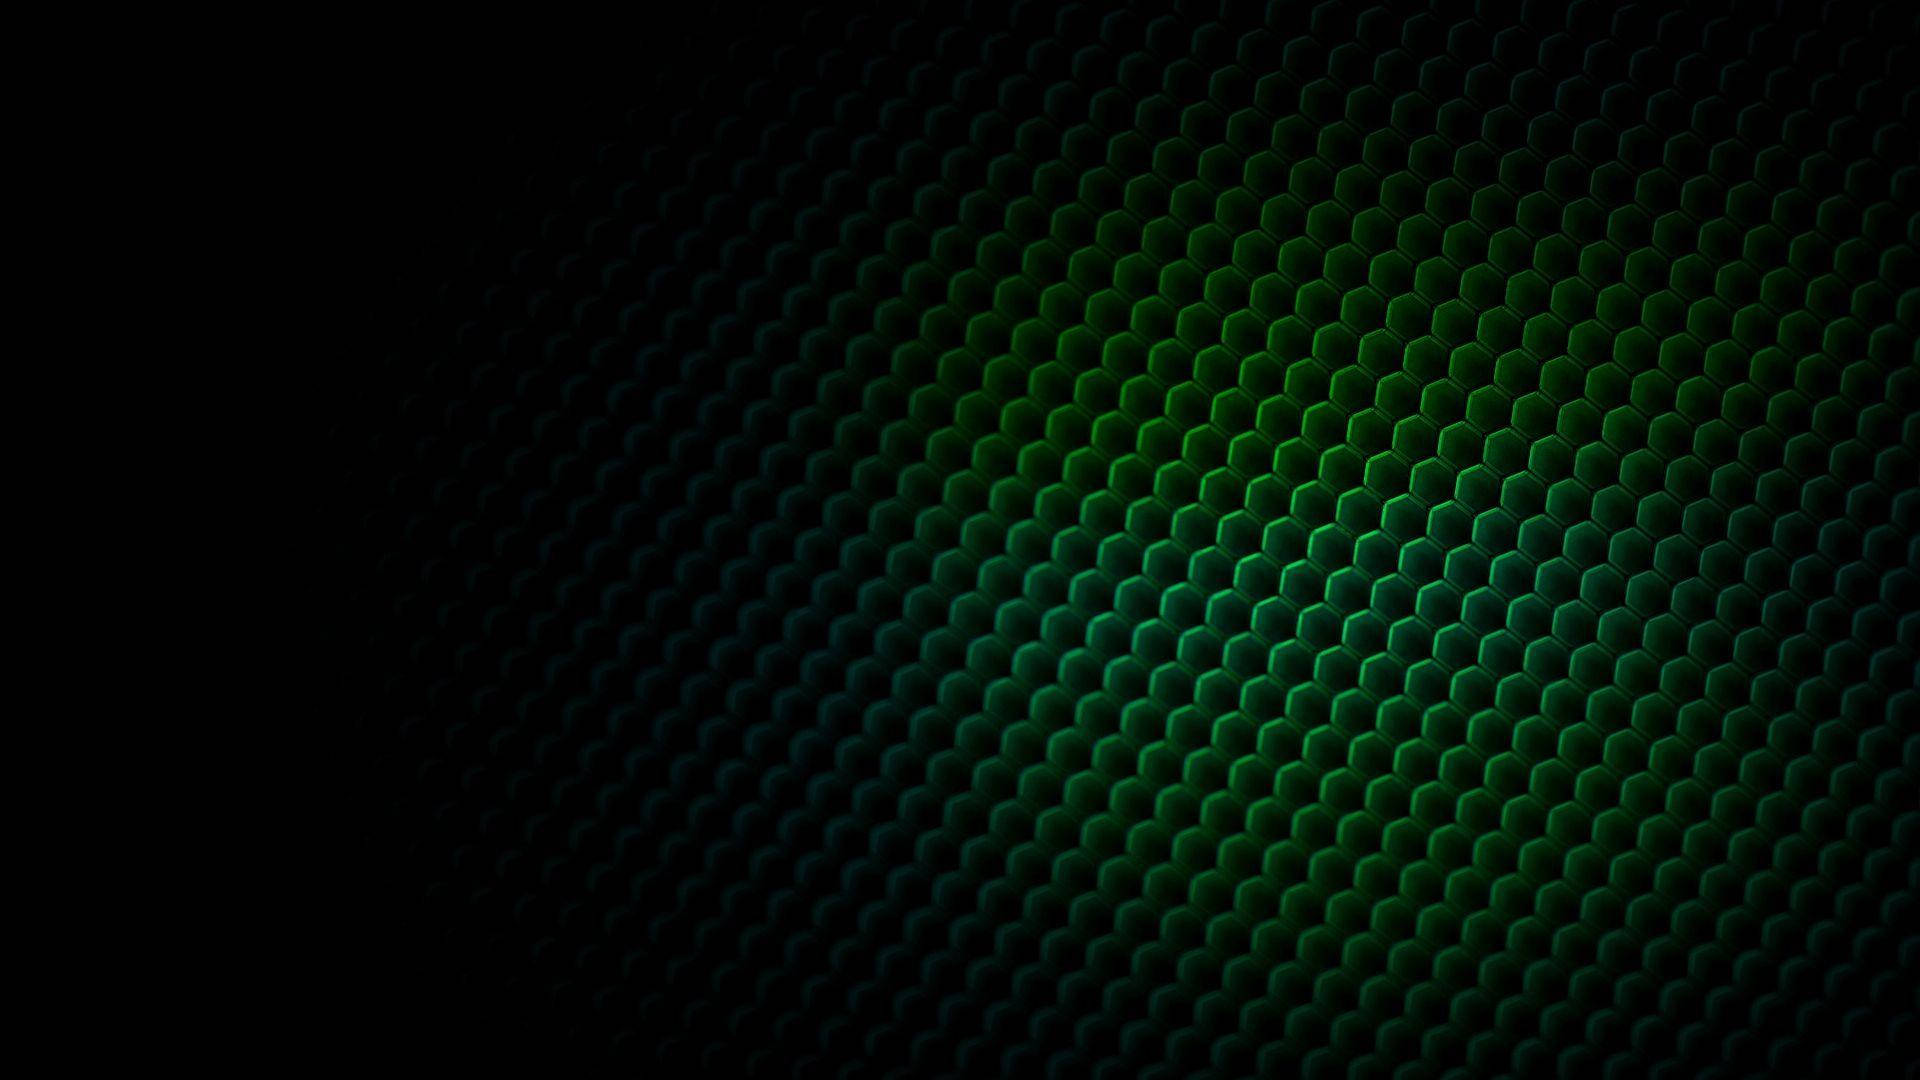 Dark Green 1920X1080 Wallpaper and Background Image